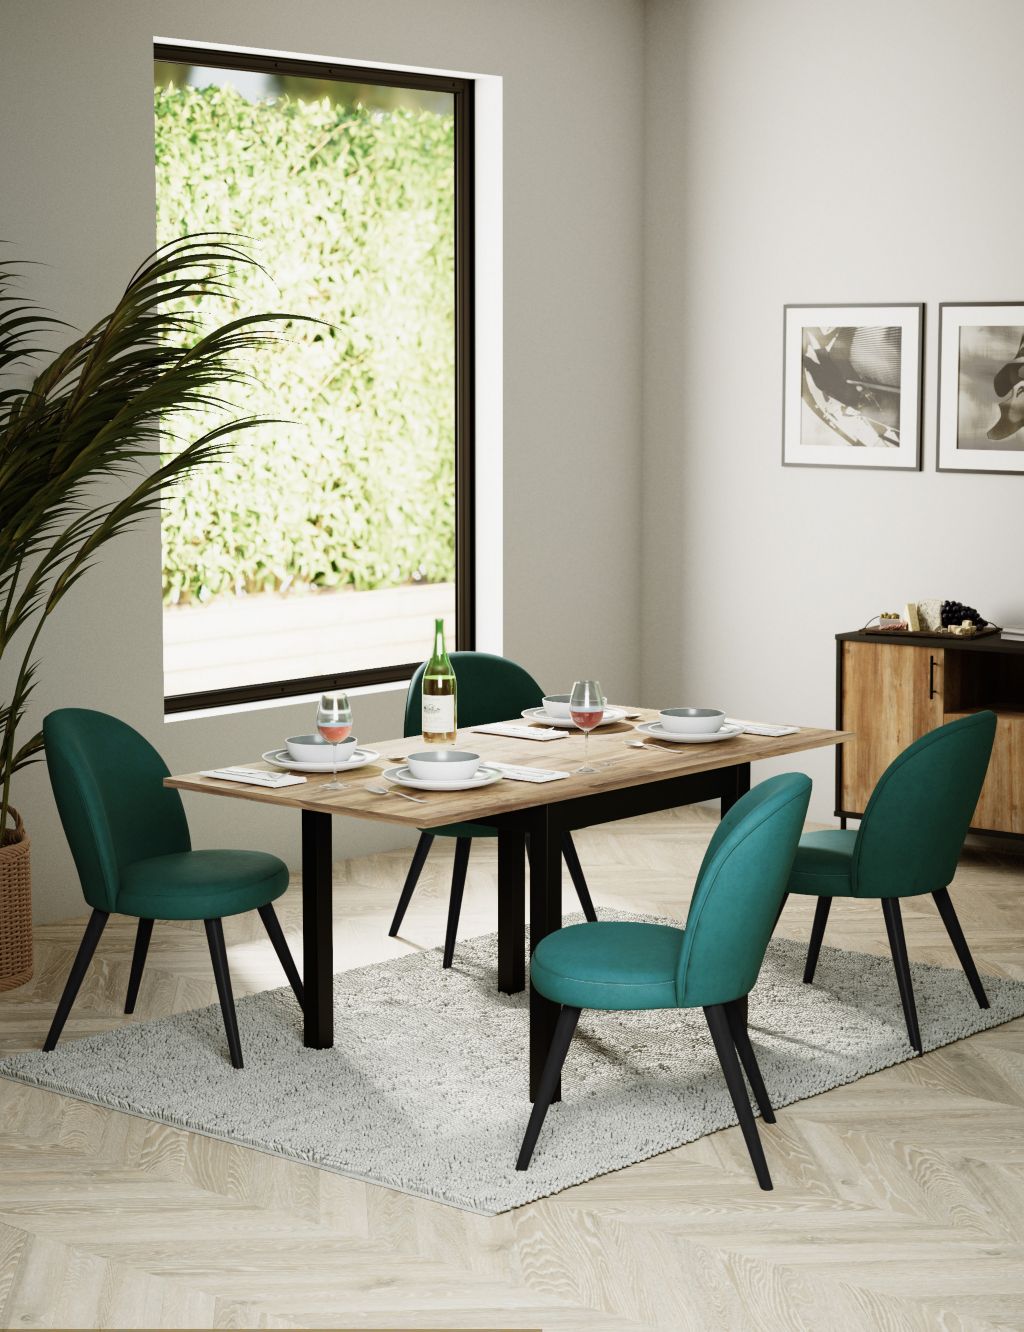 Holt 4-6 Seater Extending Dining Table